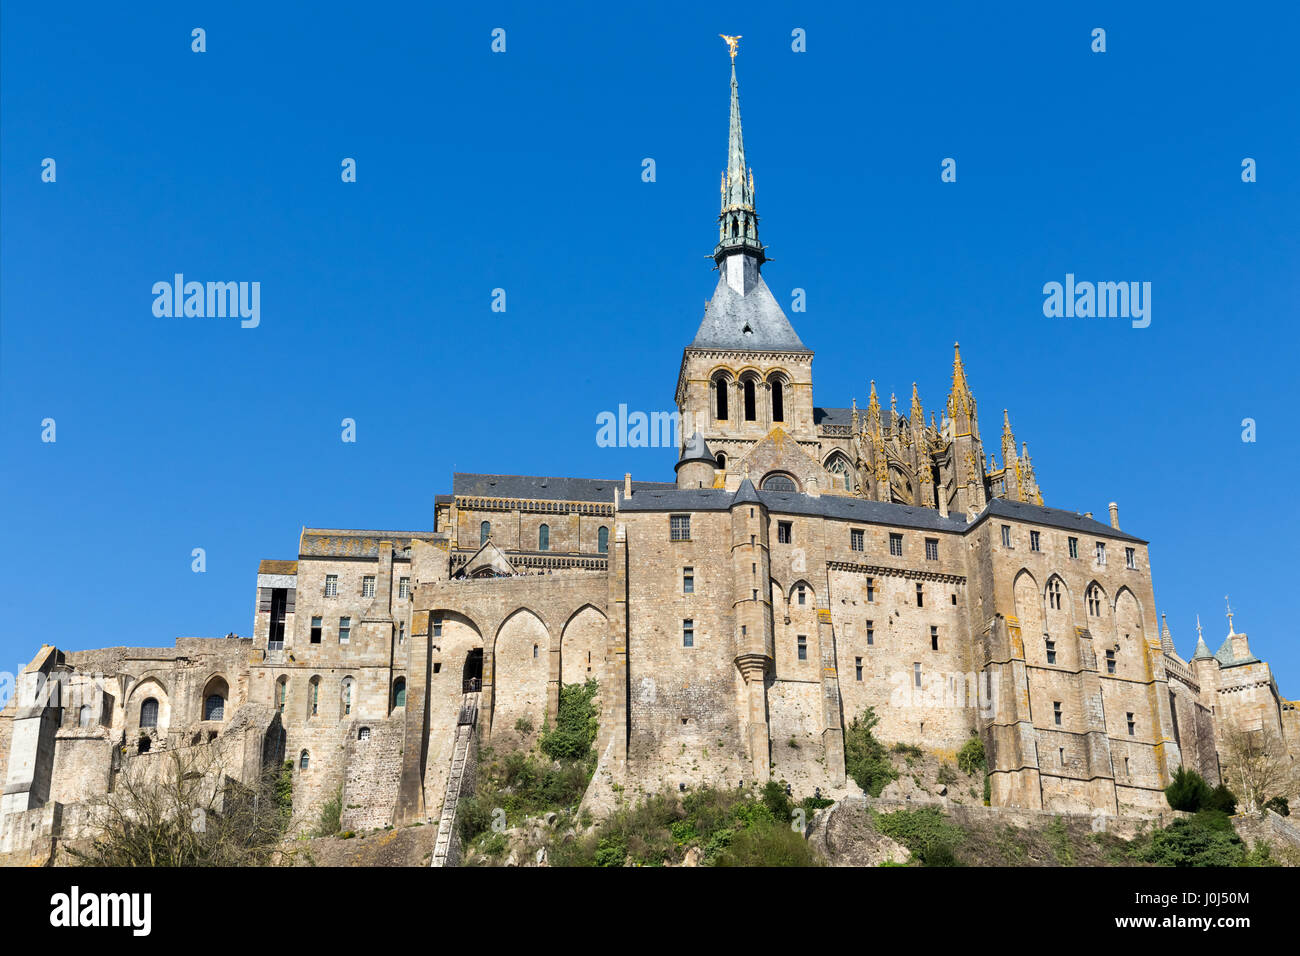 The medieval Mont-Saint-Michel Abbey on a tidal island and mainland commune in Normandy, in the department of Manche, France. Stock Photo